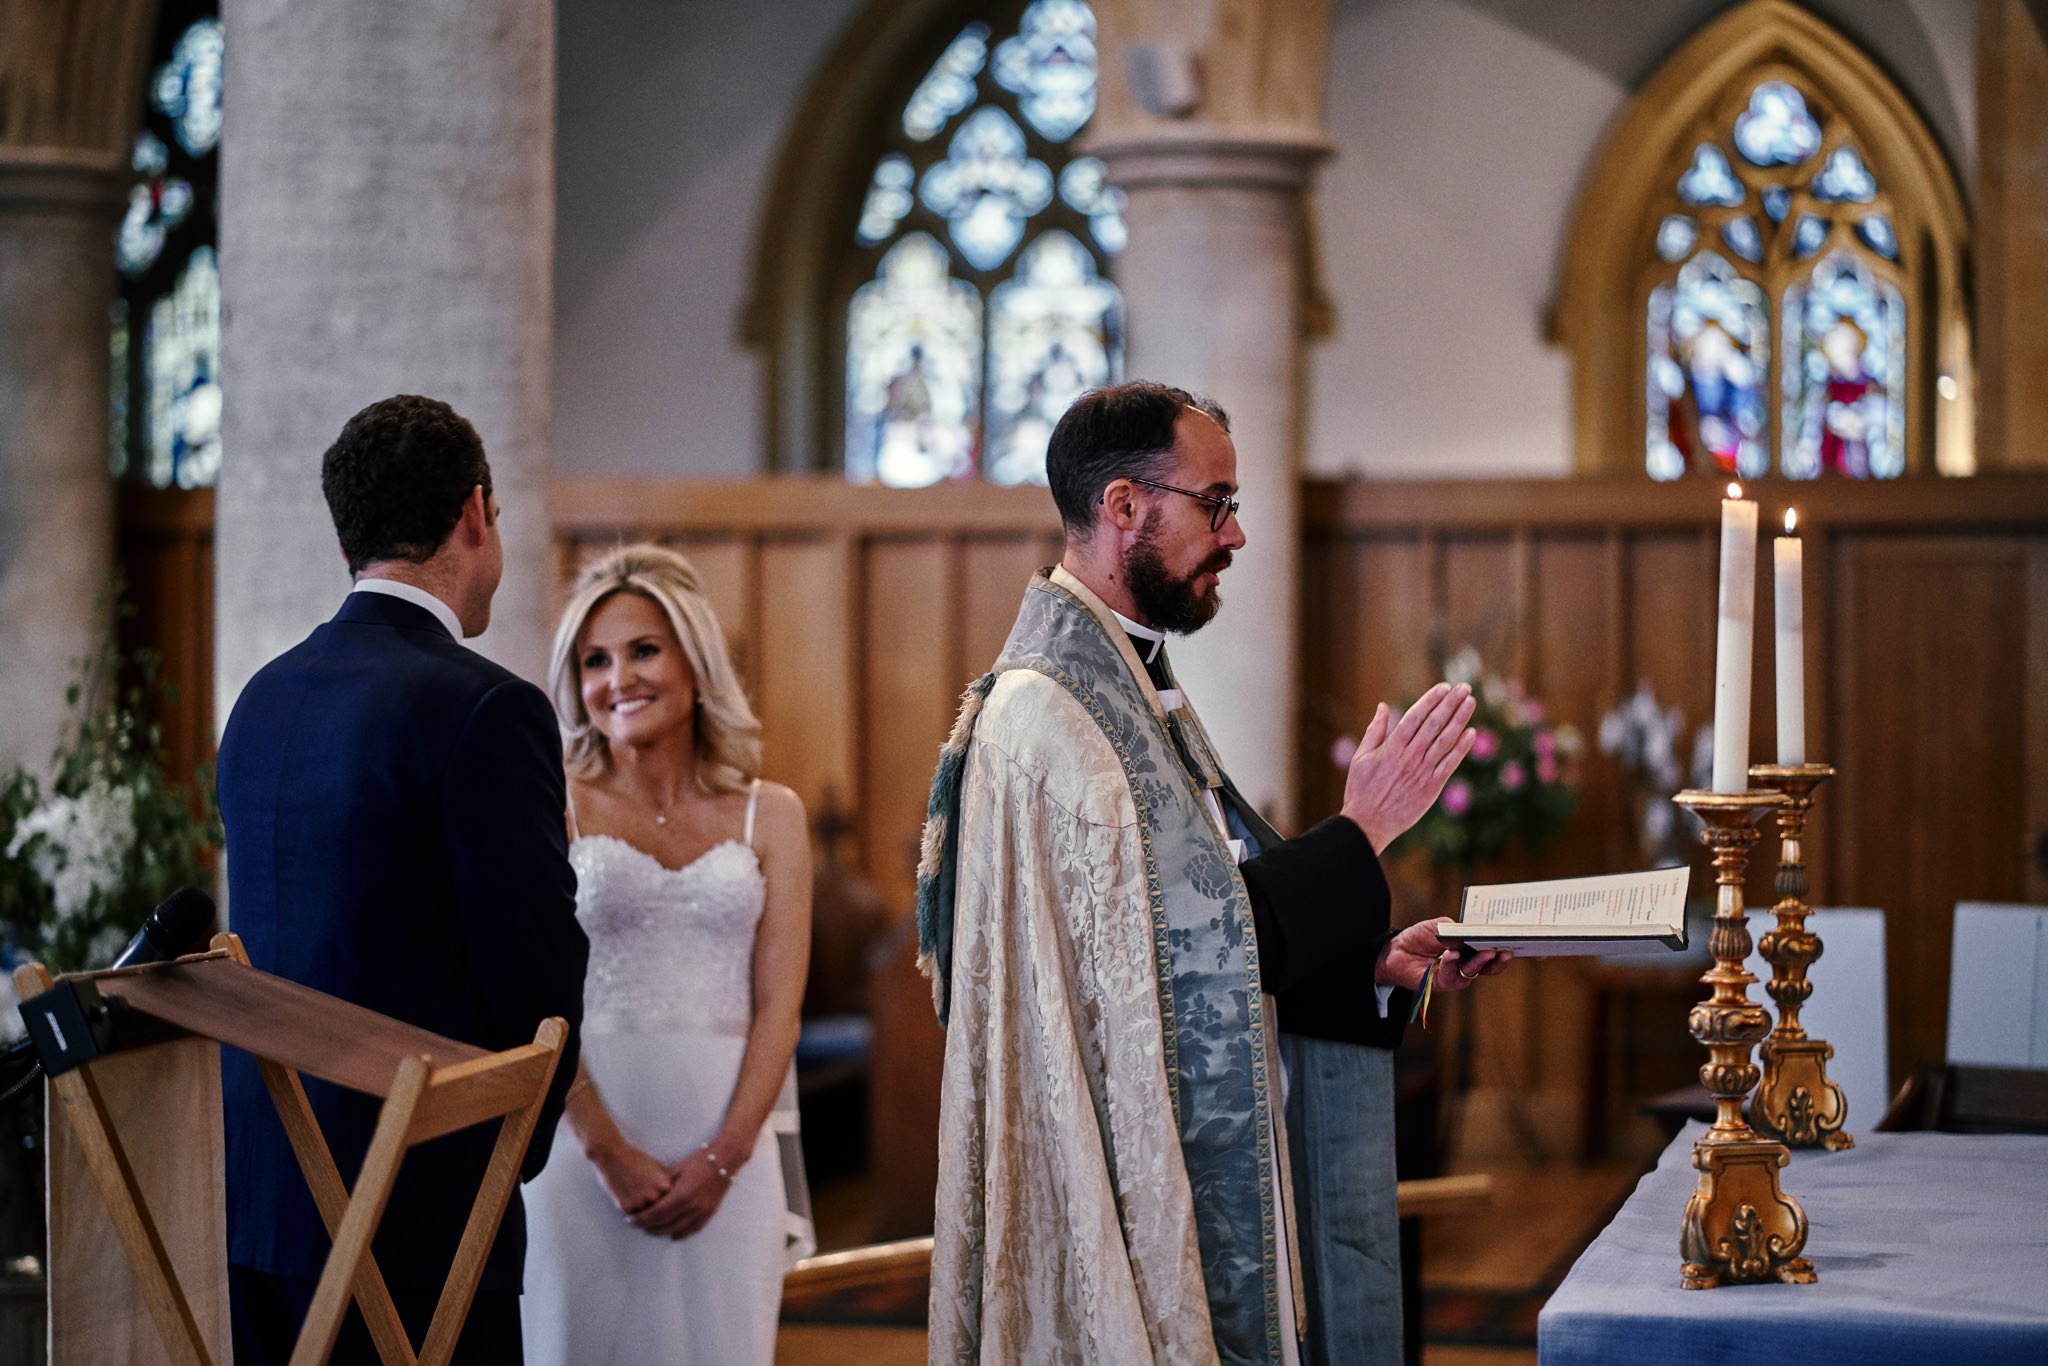 Bride and Groom during a wedding service at St Mary's Church, Henley-on-Thames